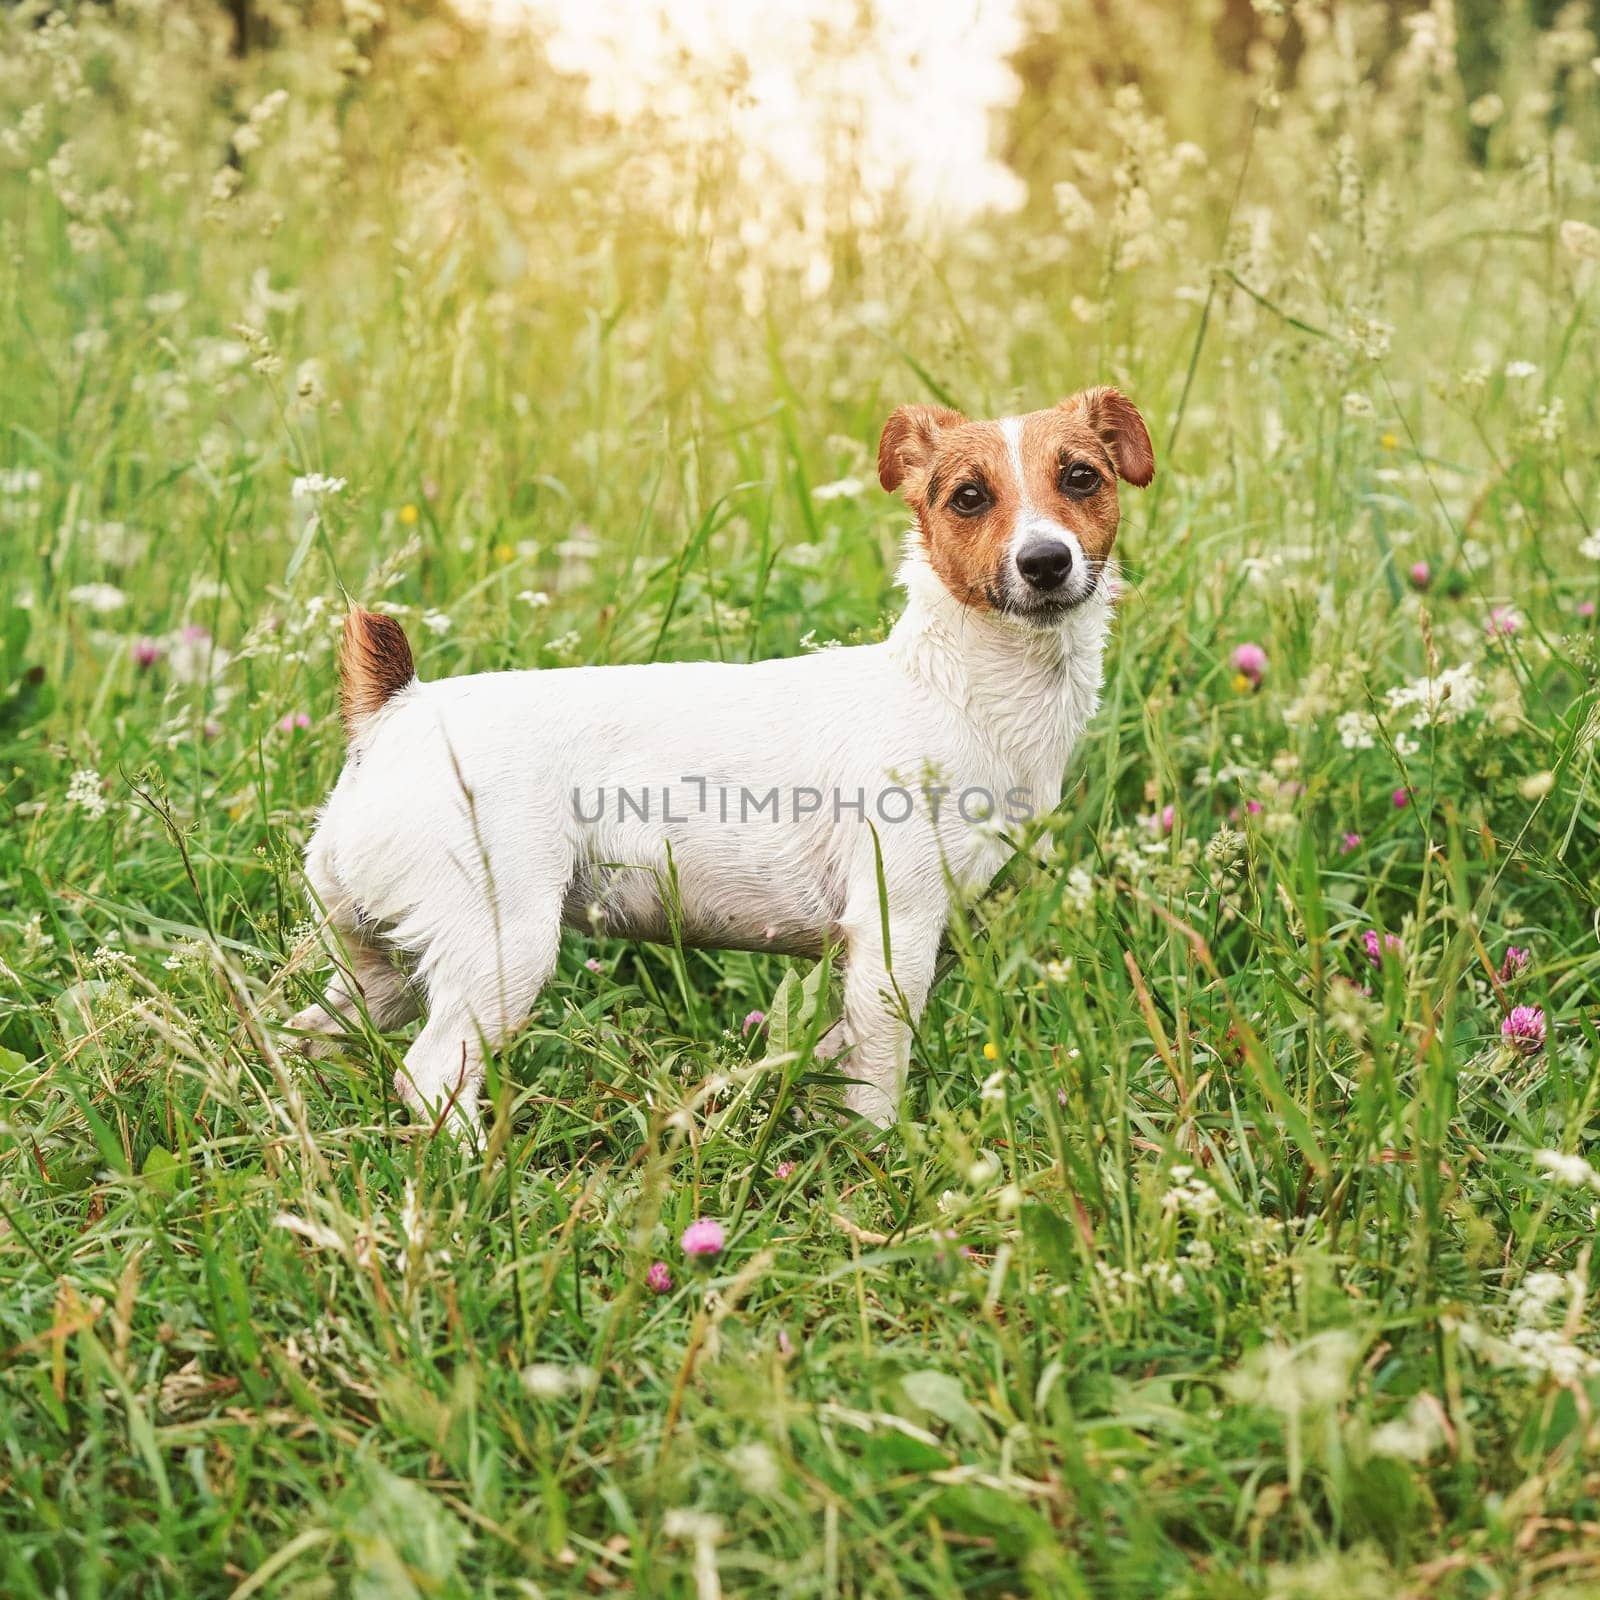 Jack Russell terrier dog standing in grass with flowers, her fur still wet from swimming, afternoon sun shines background by Ivanko